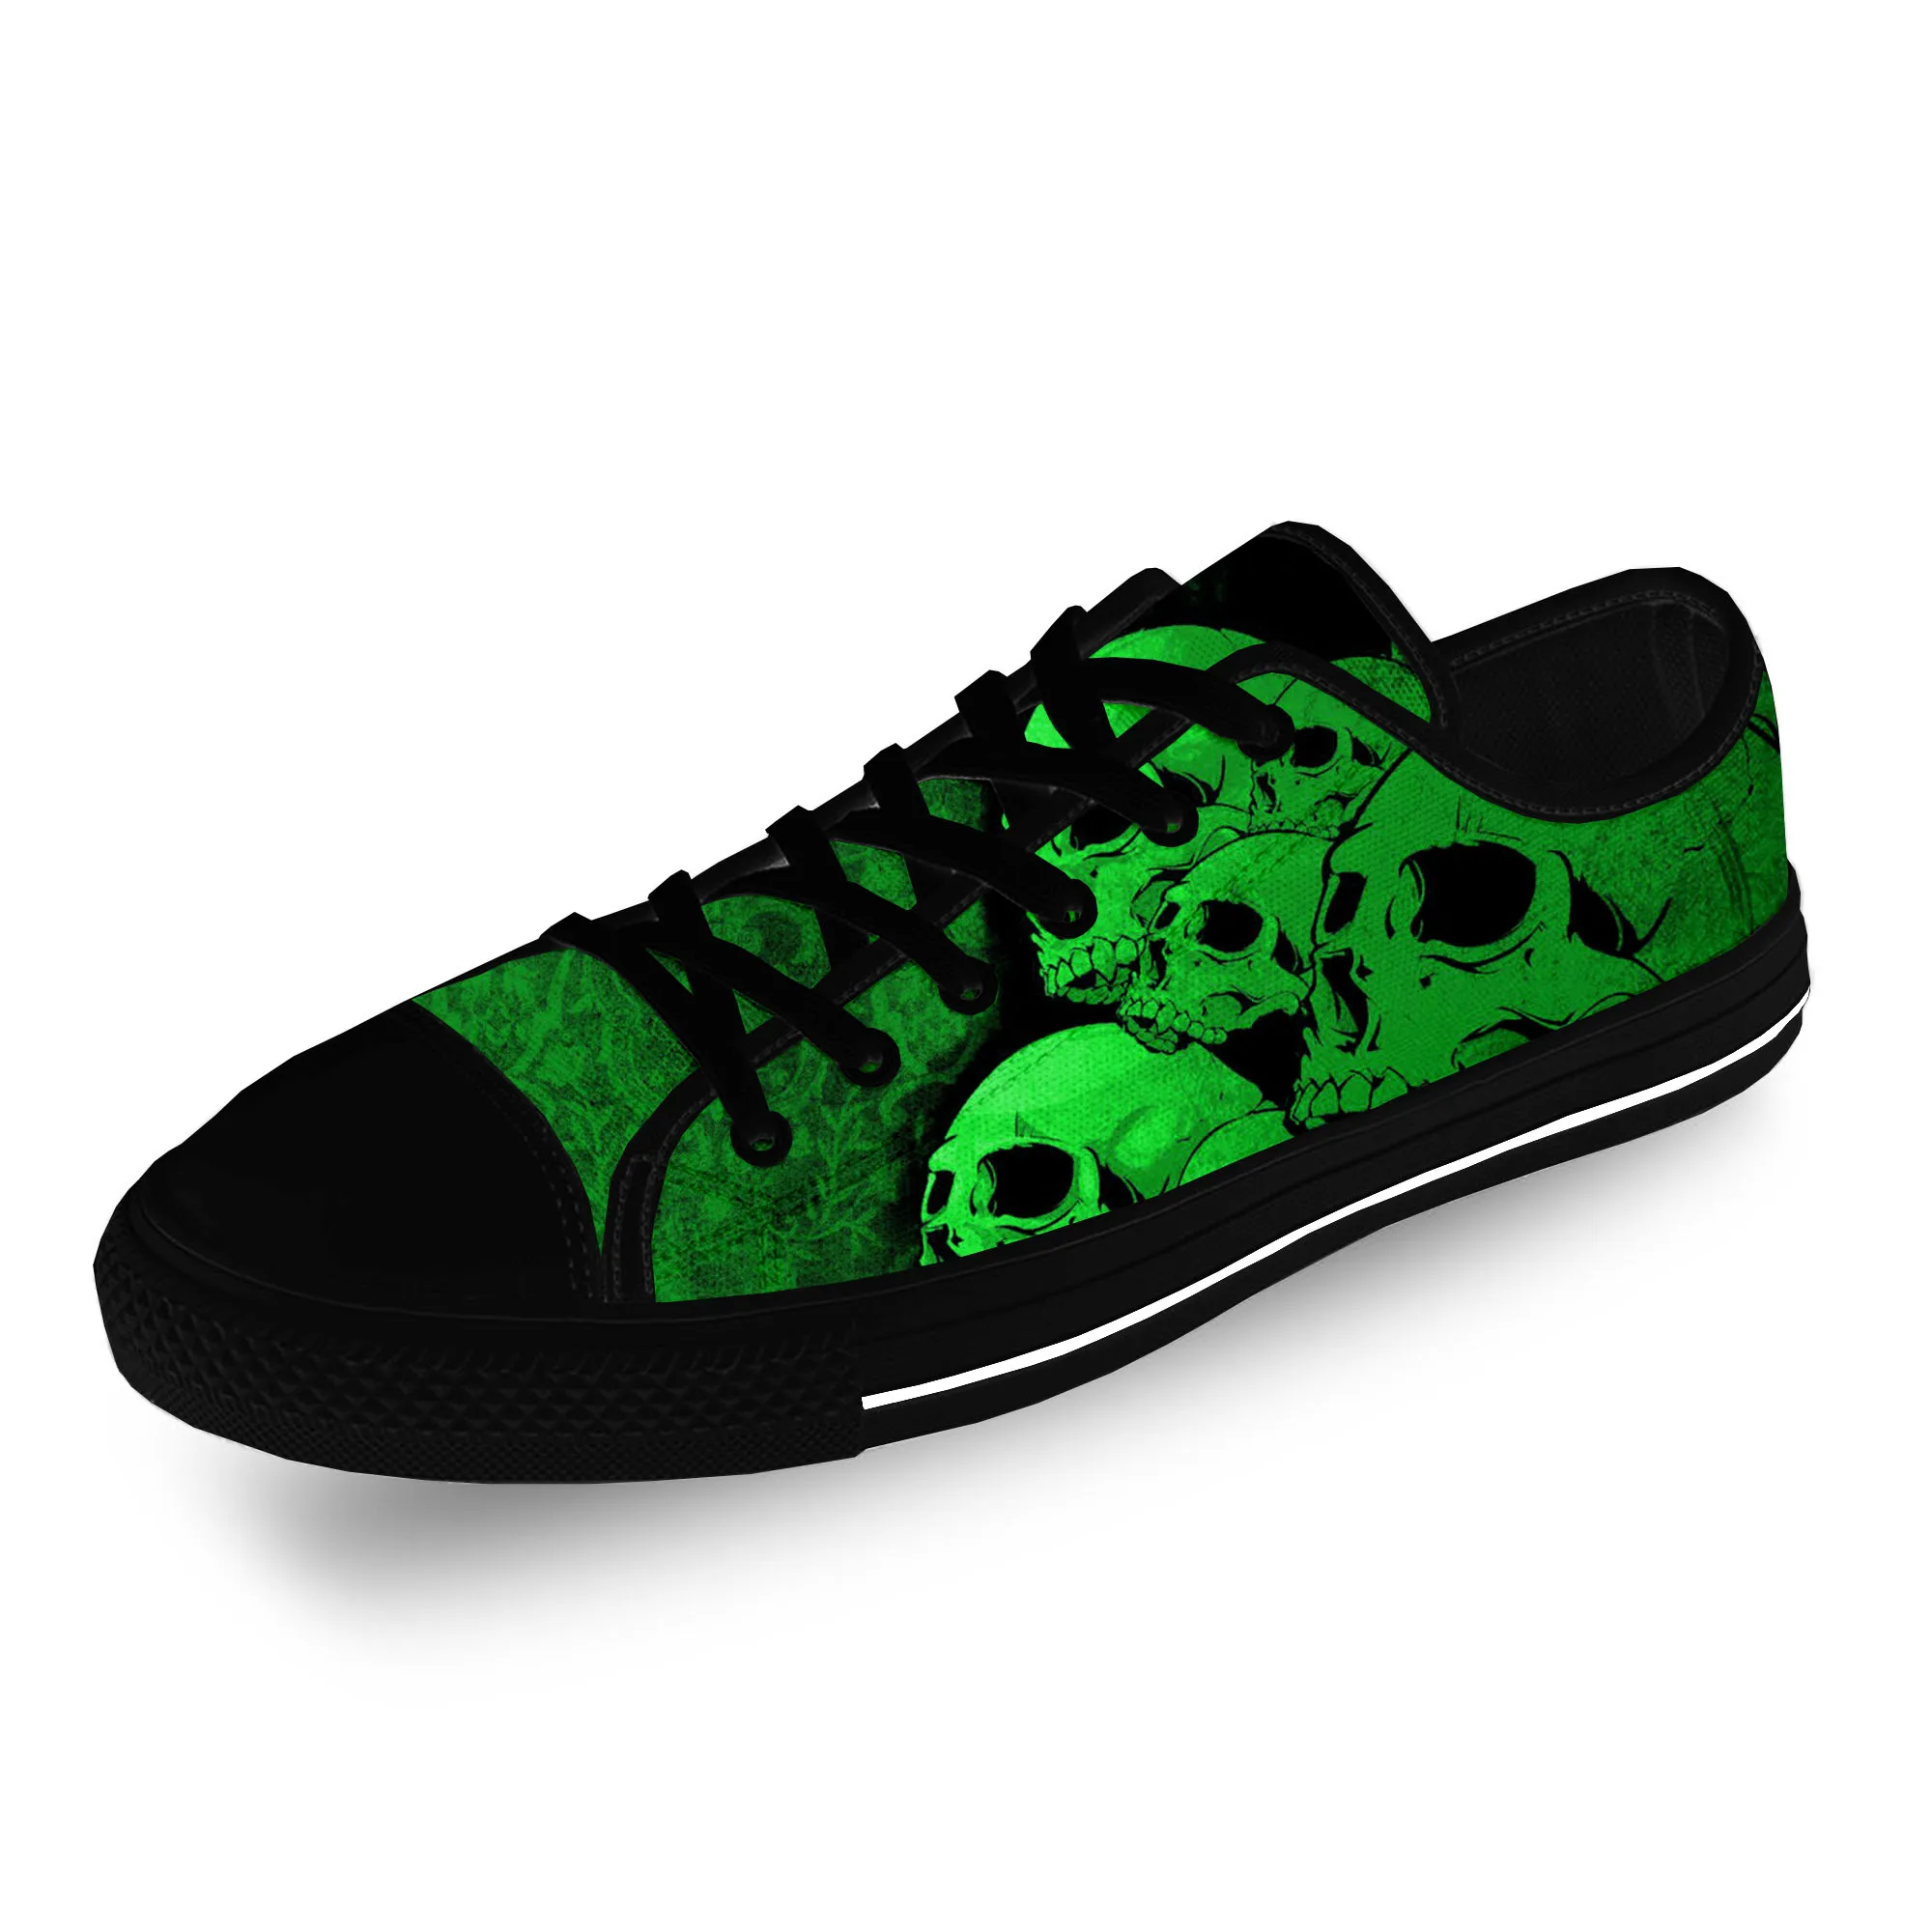 

SKull Skeleton PAisley Horror Halloween Casual Cloth 3D Print Low Top Canvas Fashion Shoes Men Women Breathable Sneakers